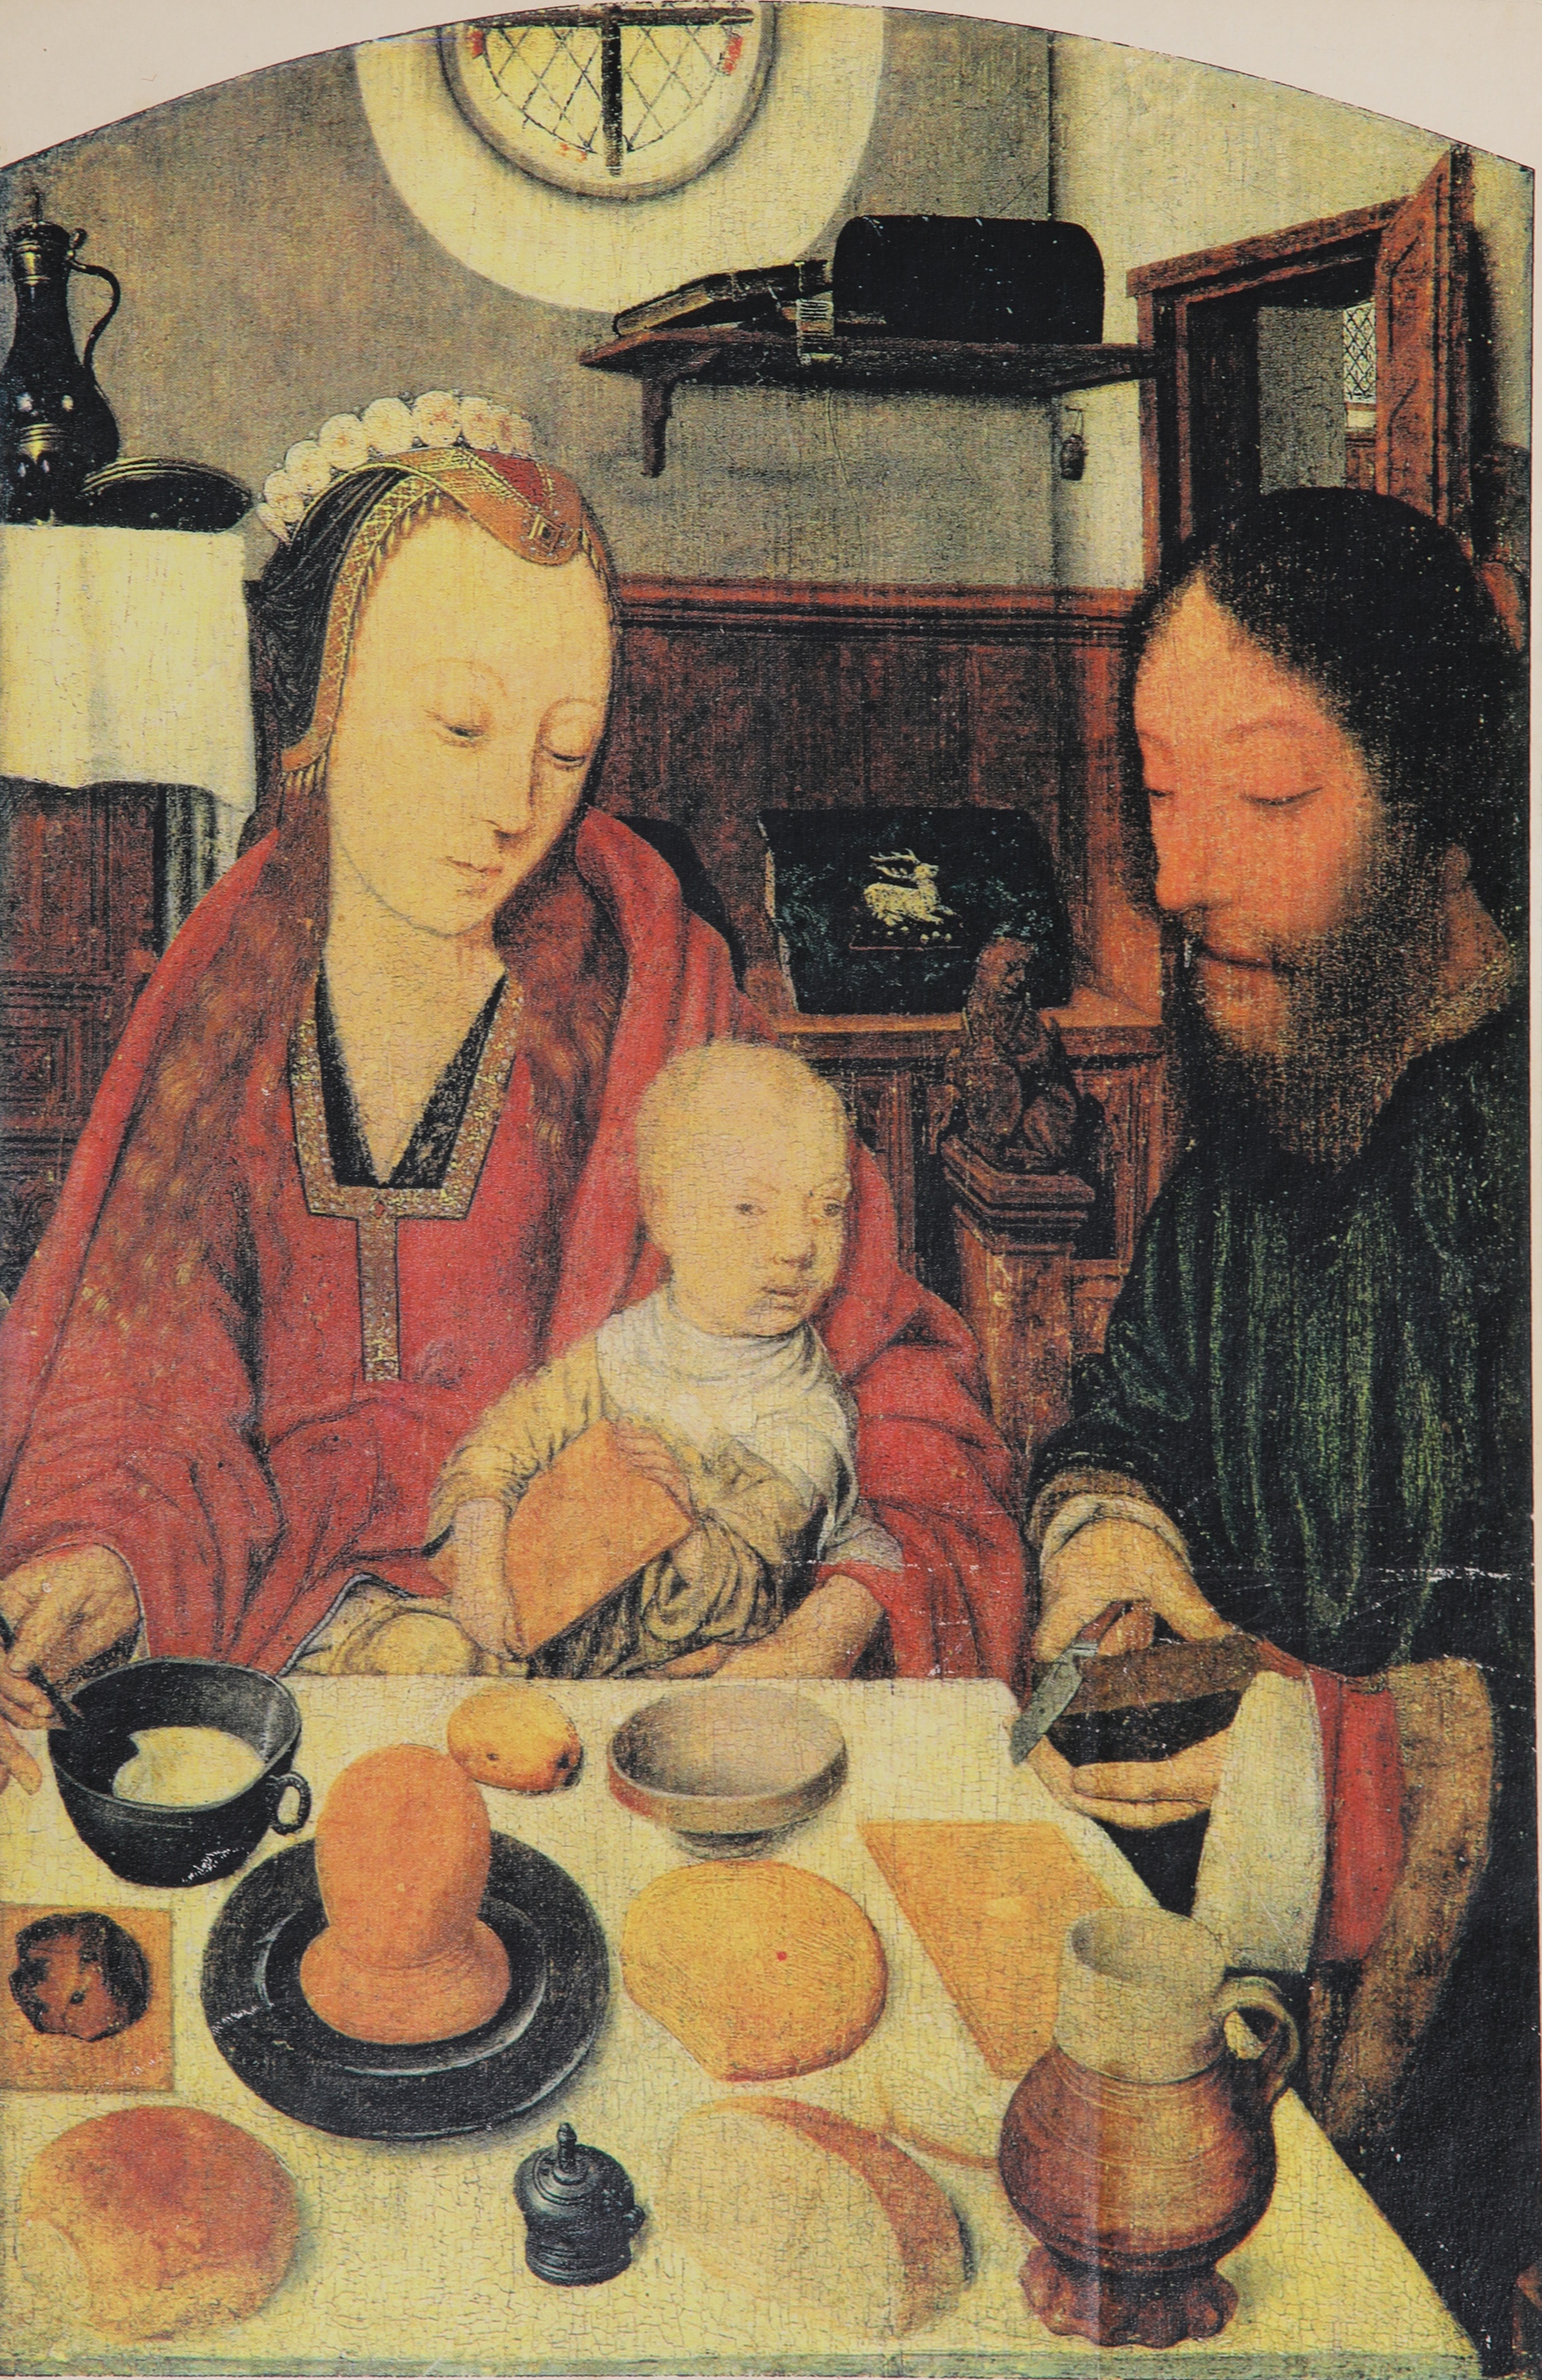 The Holy Family, by Jan Mostaert (c.1495-1500) showing a similar Siegburg jug that is in the collection.